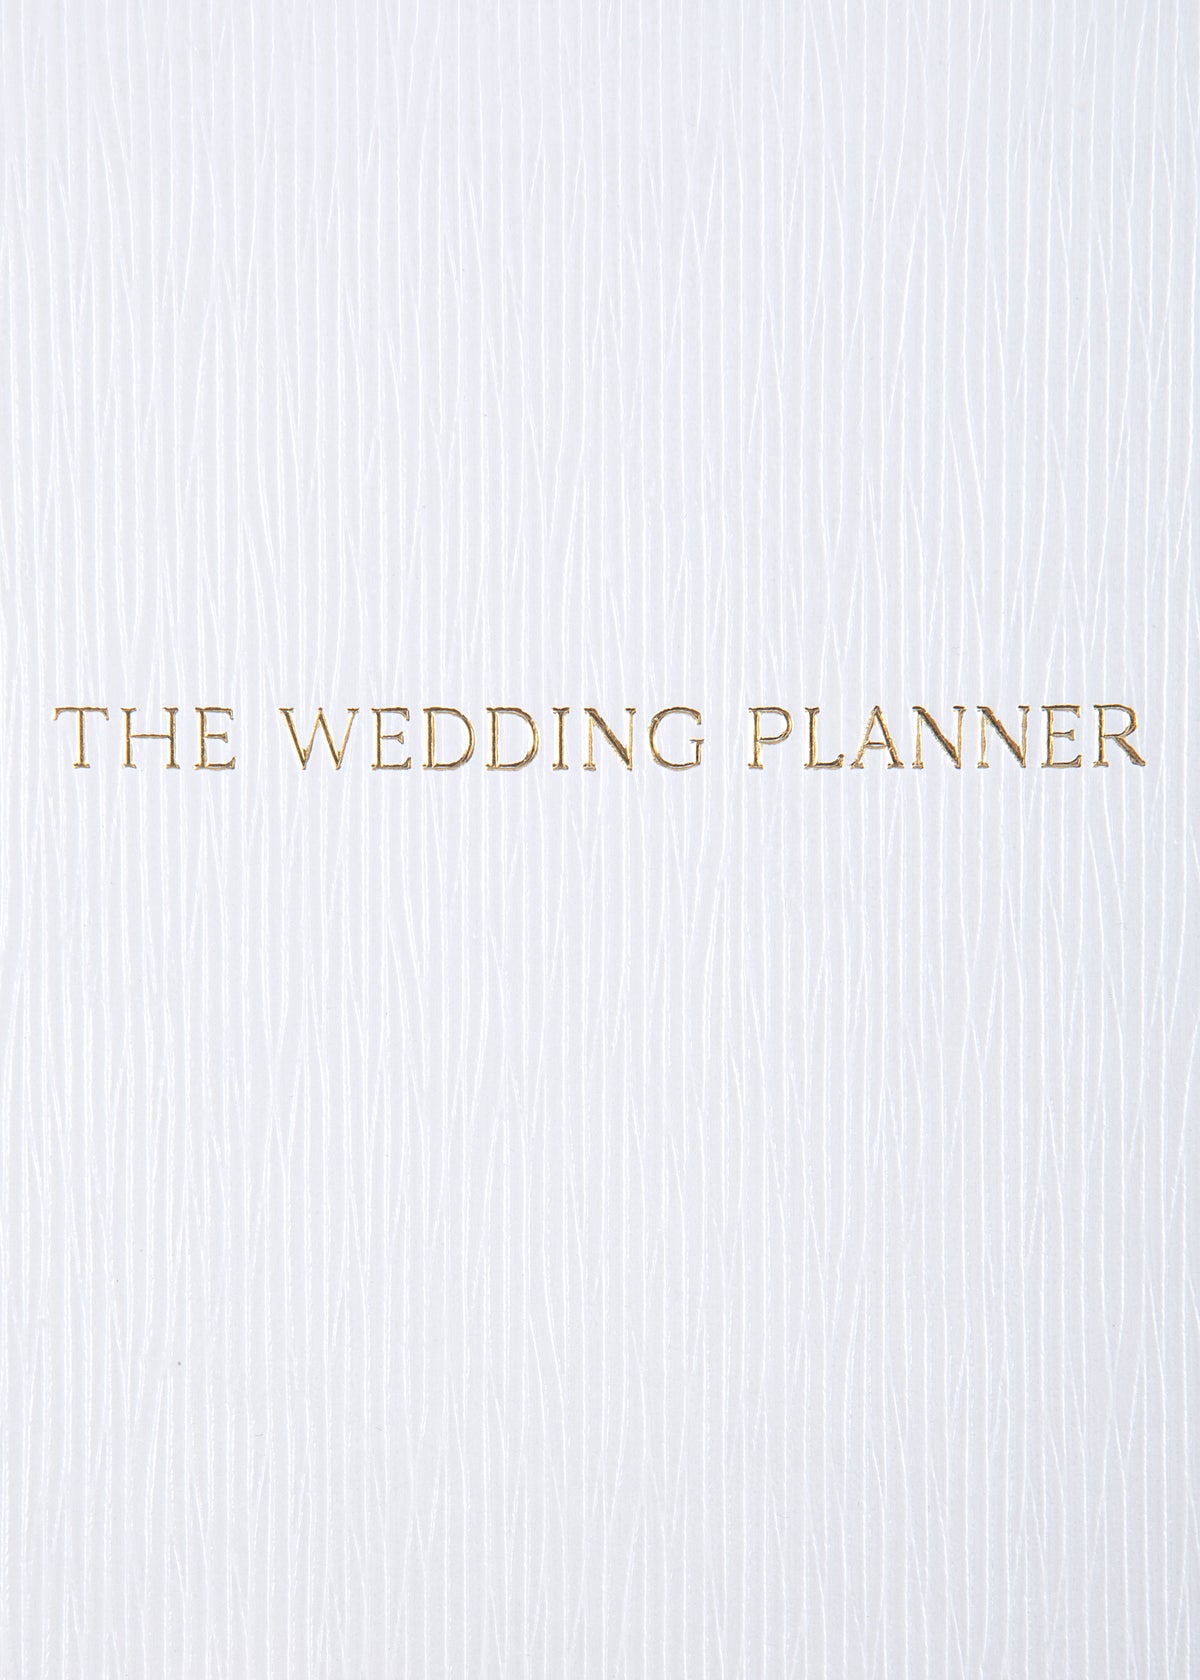 The Wedding Planner, A5 Tabbed Book